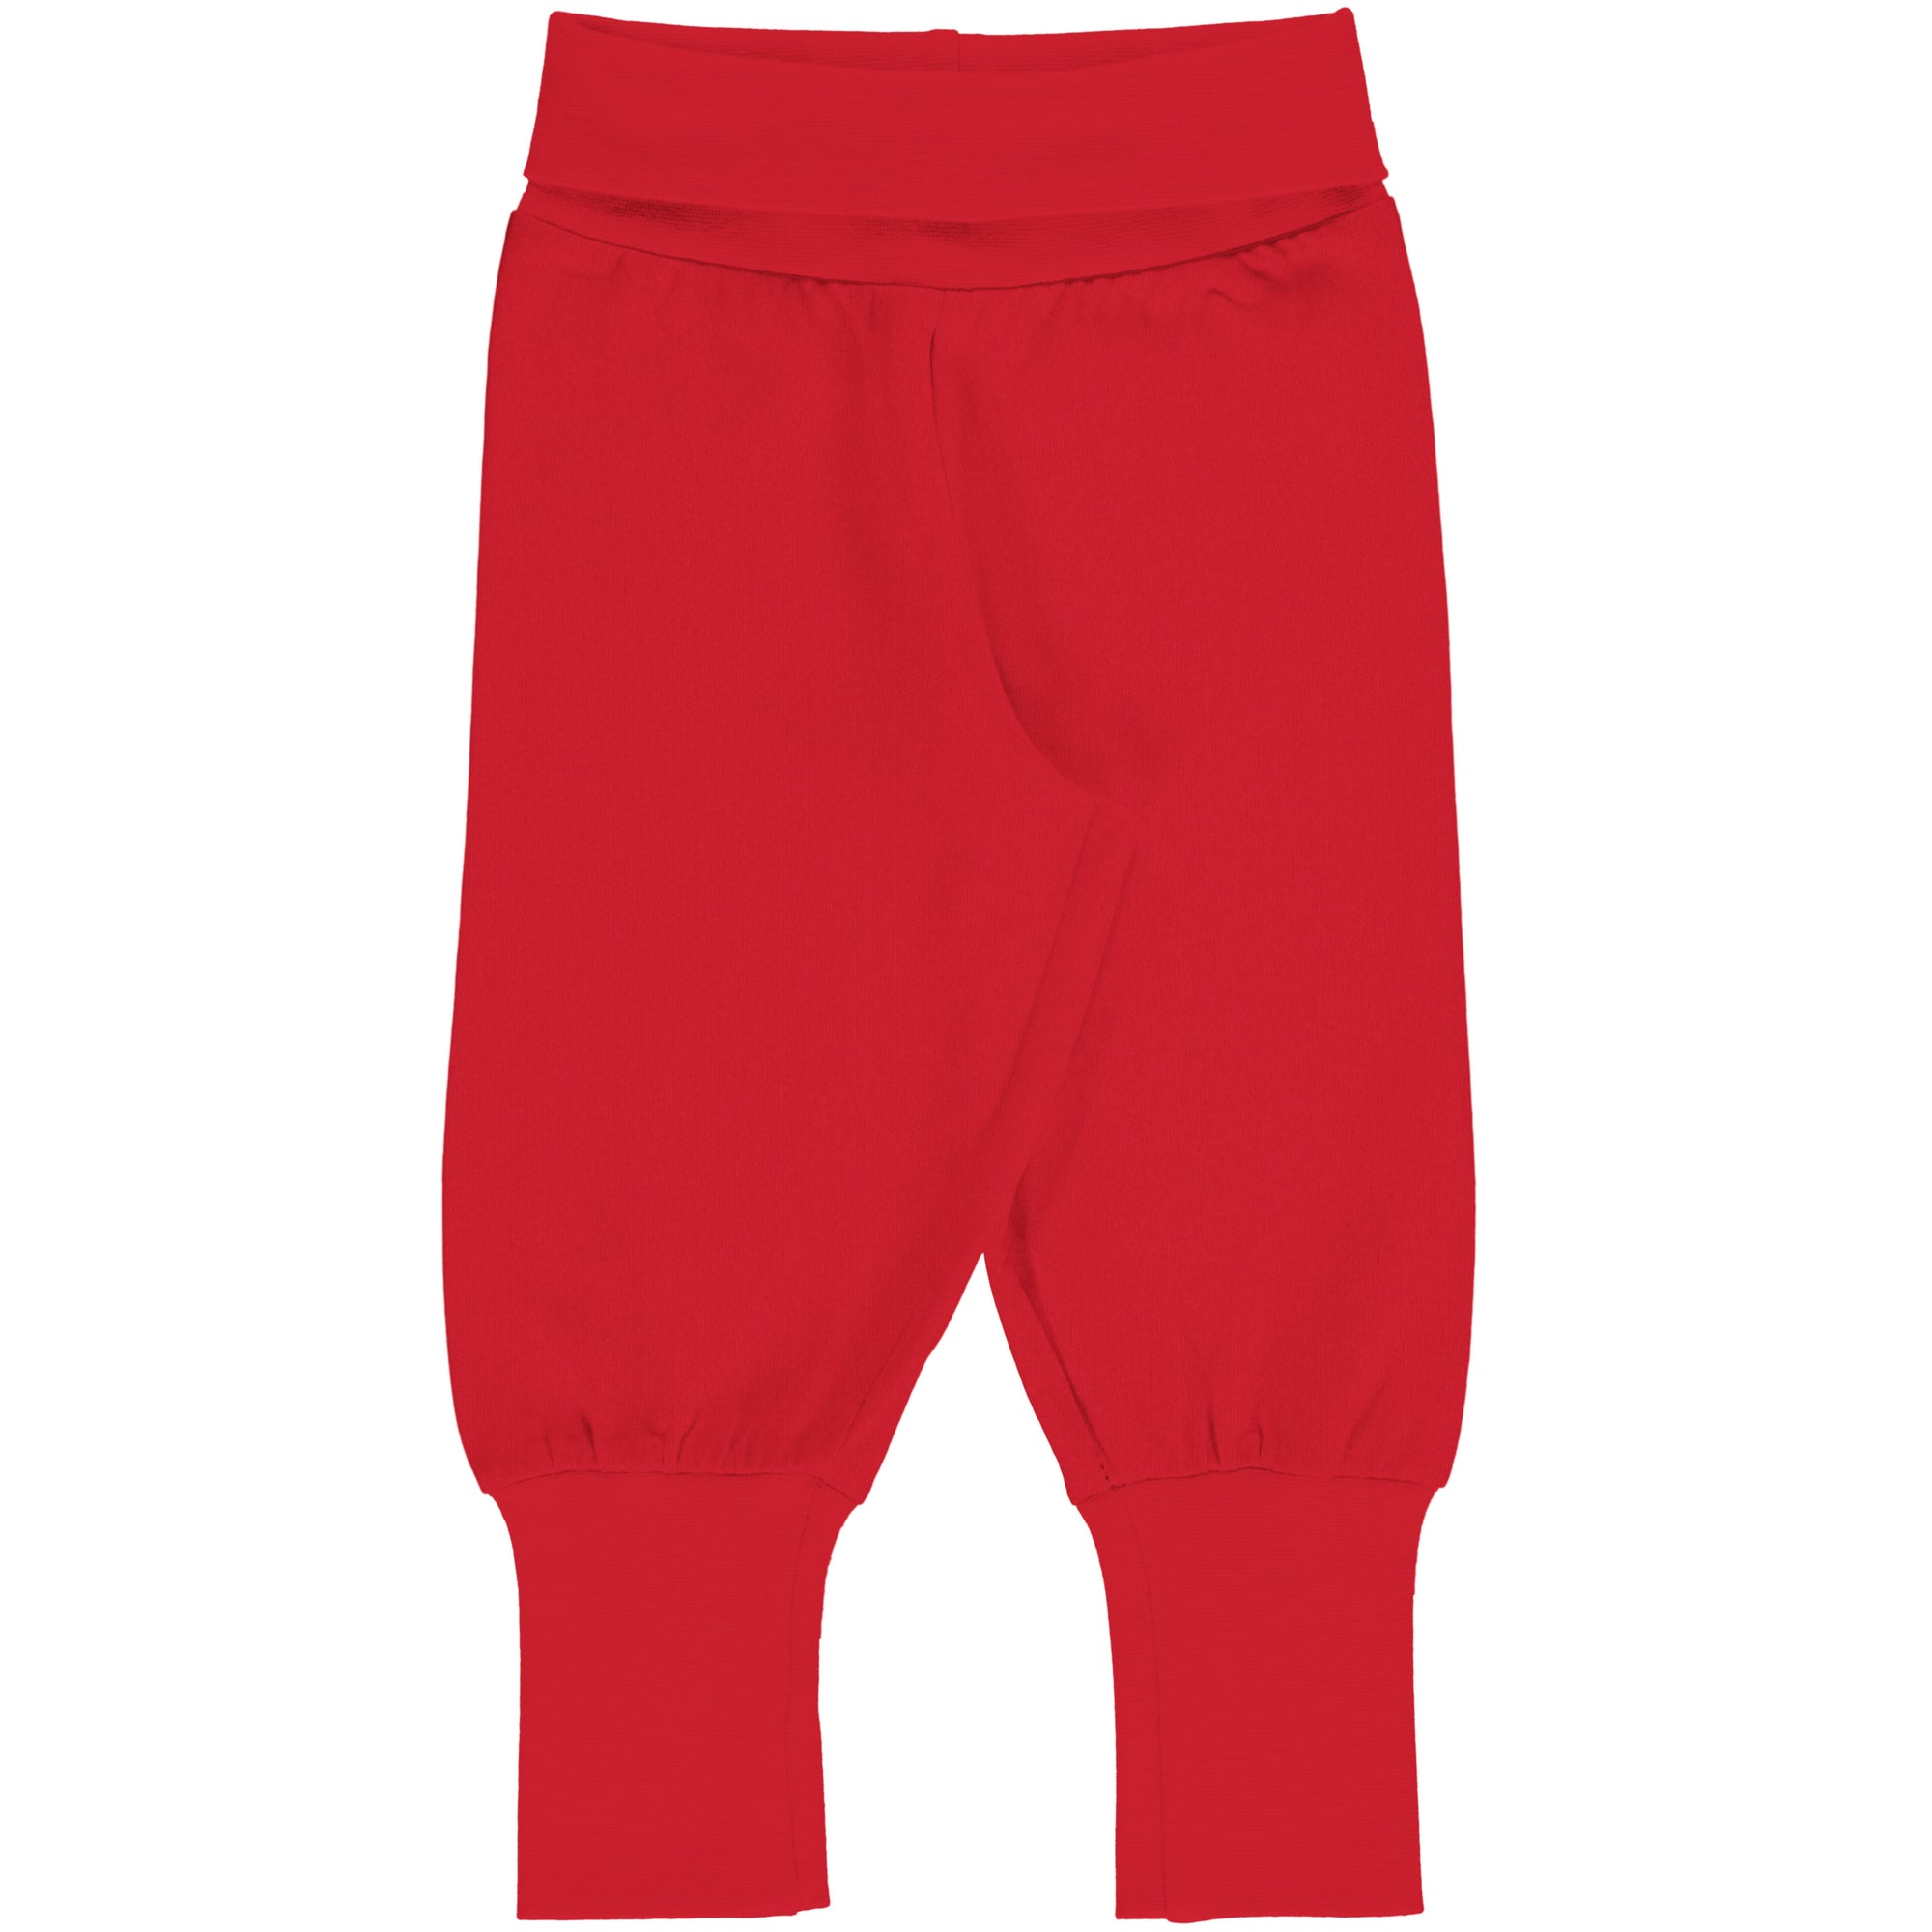 Maxomorra Red Infant Jersey Pants Clothing 0-3M / Red,3-6M / Red,9-12M / Red,18-24M / Red